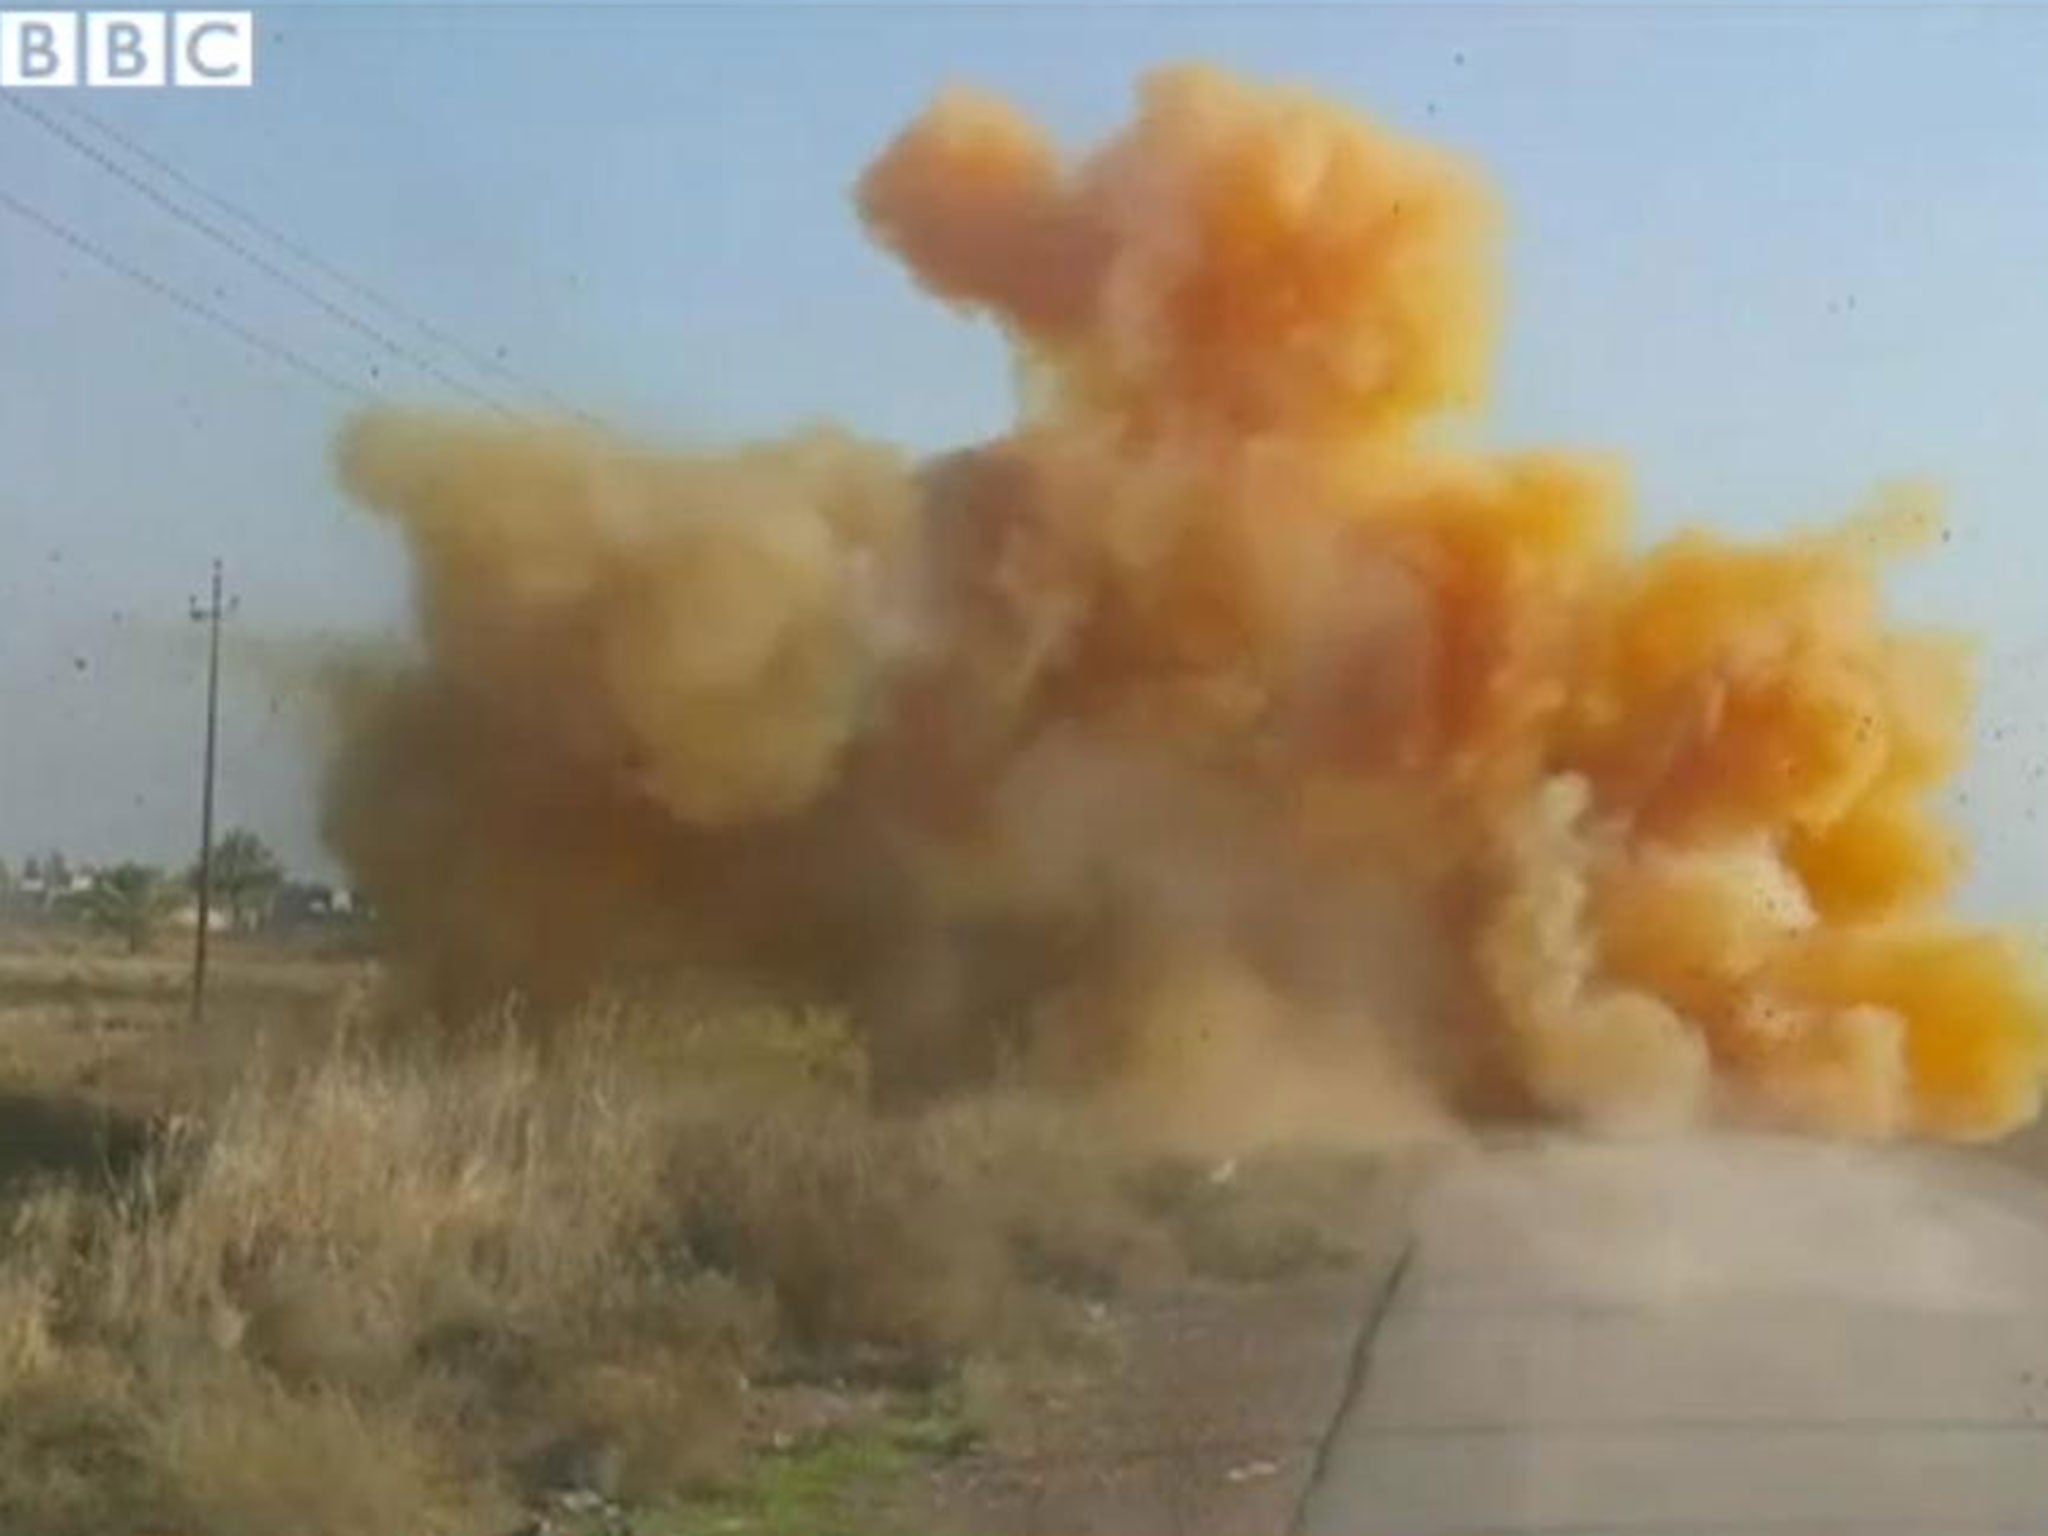 What is believed to be chlorine gas fills the air after a roadside bomb is detonated 